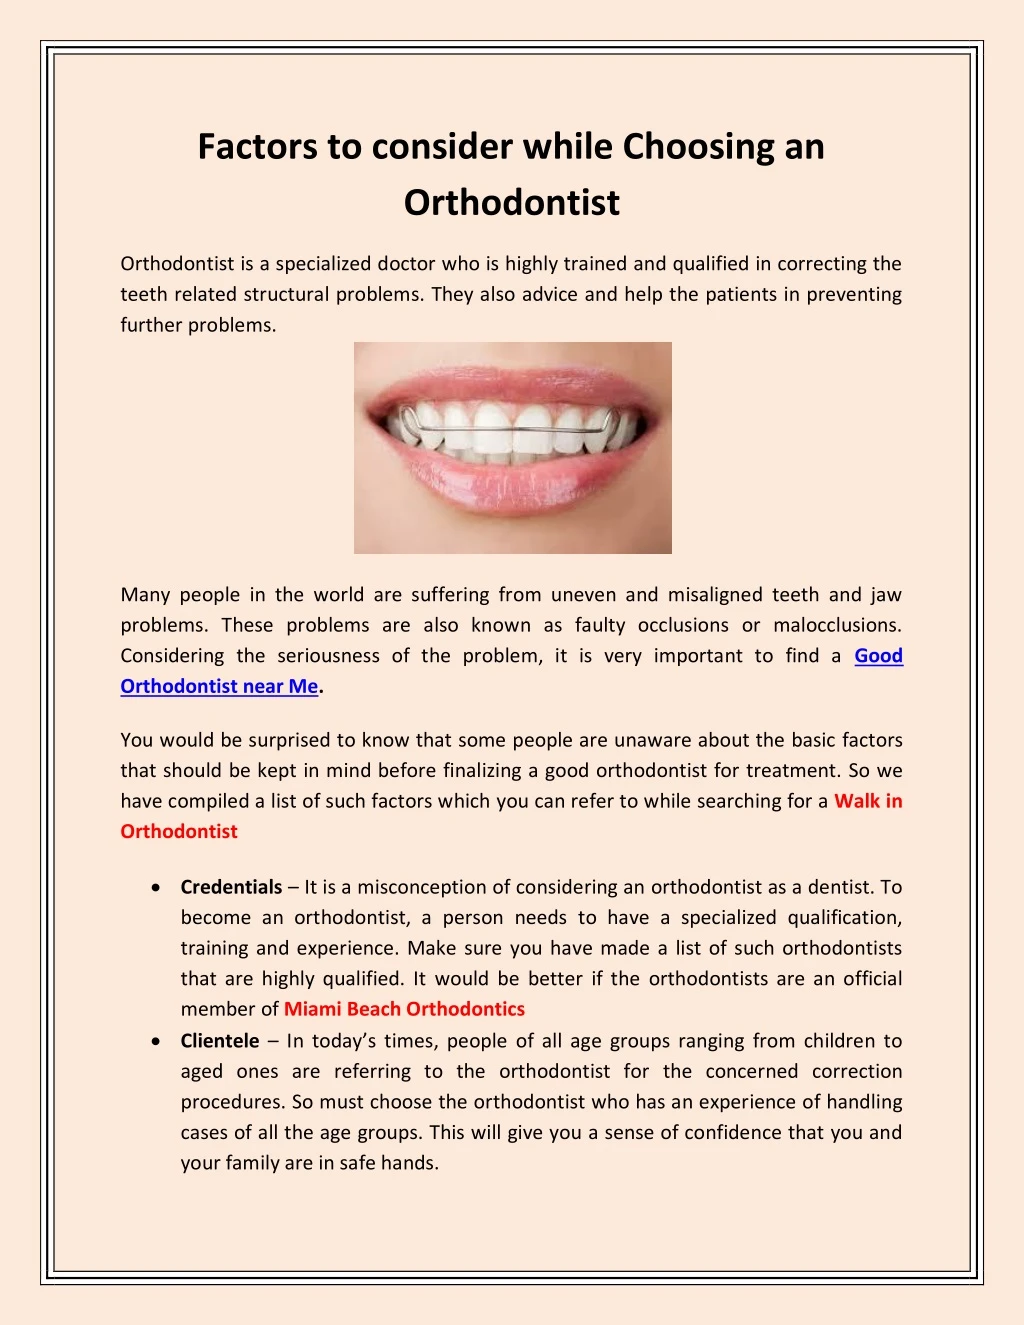 factors to consider while choosing an orthodontist